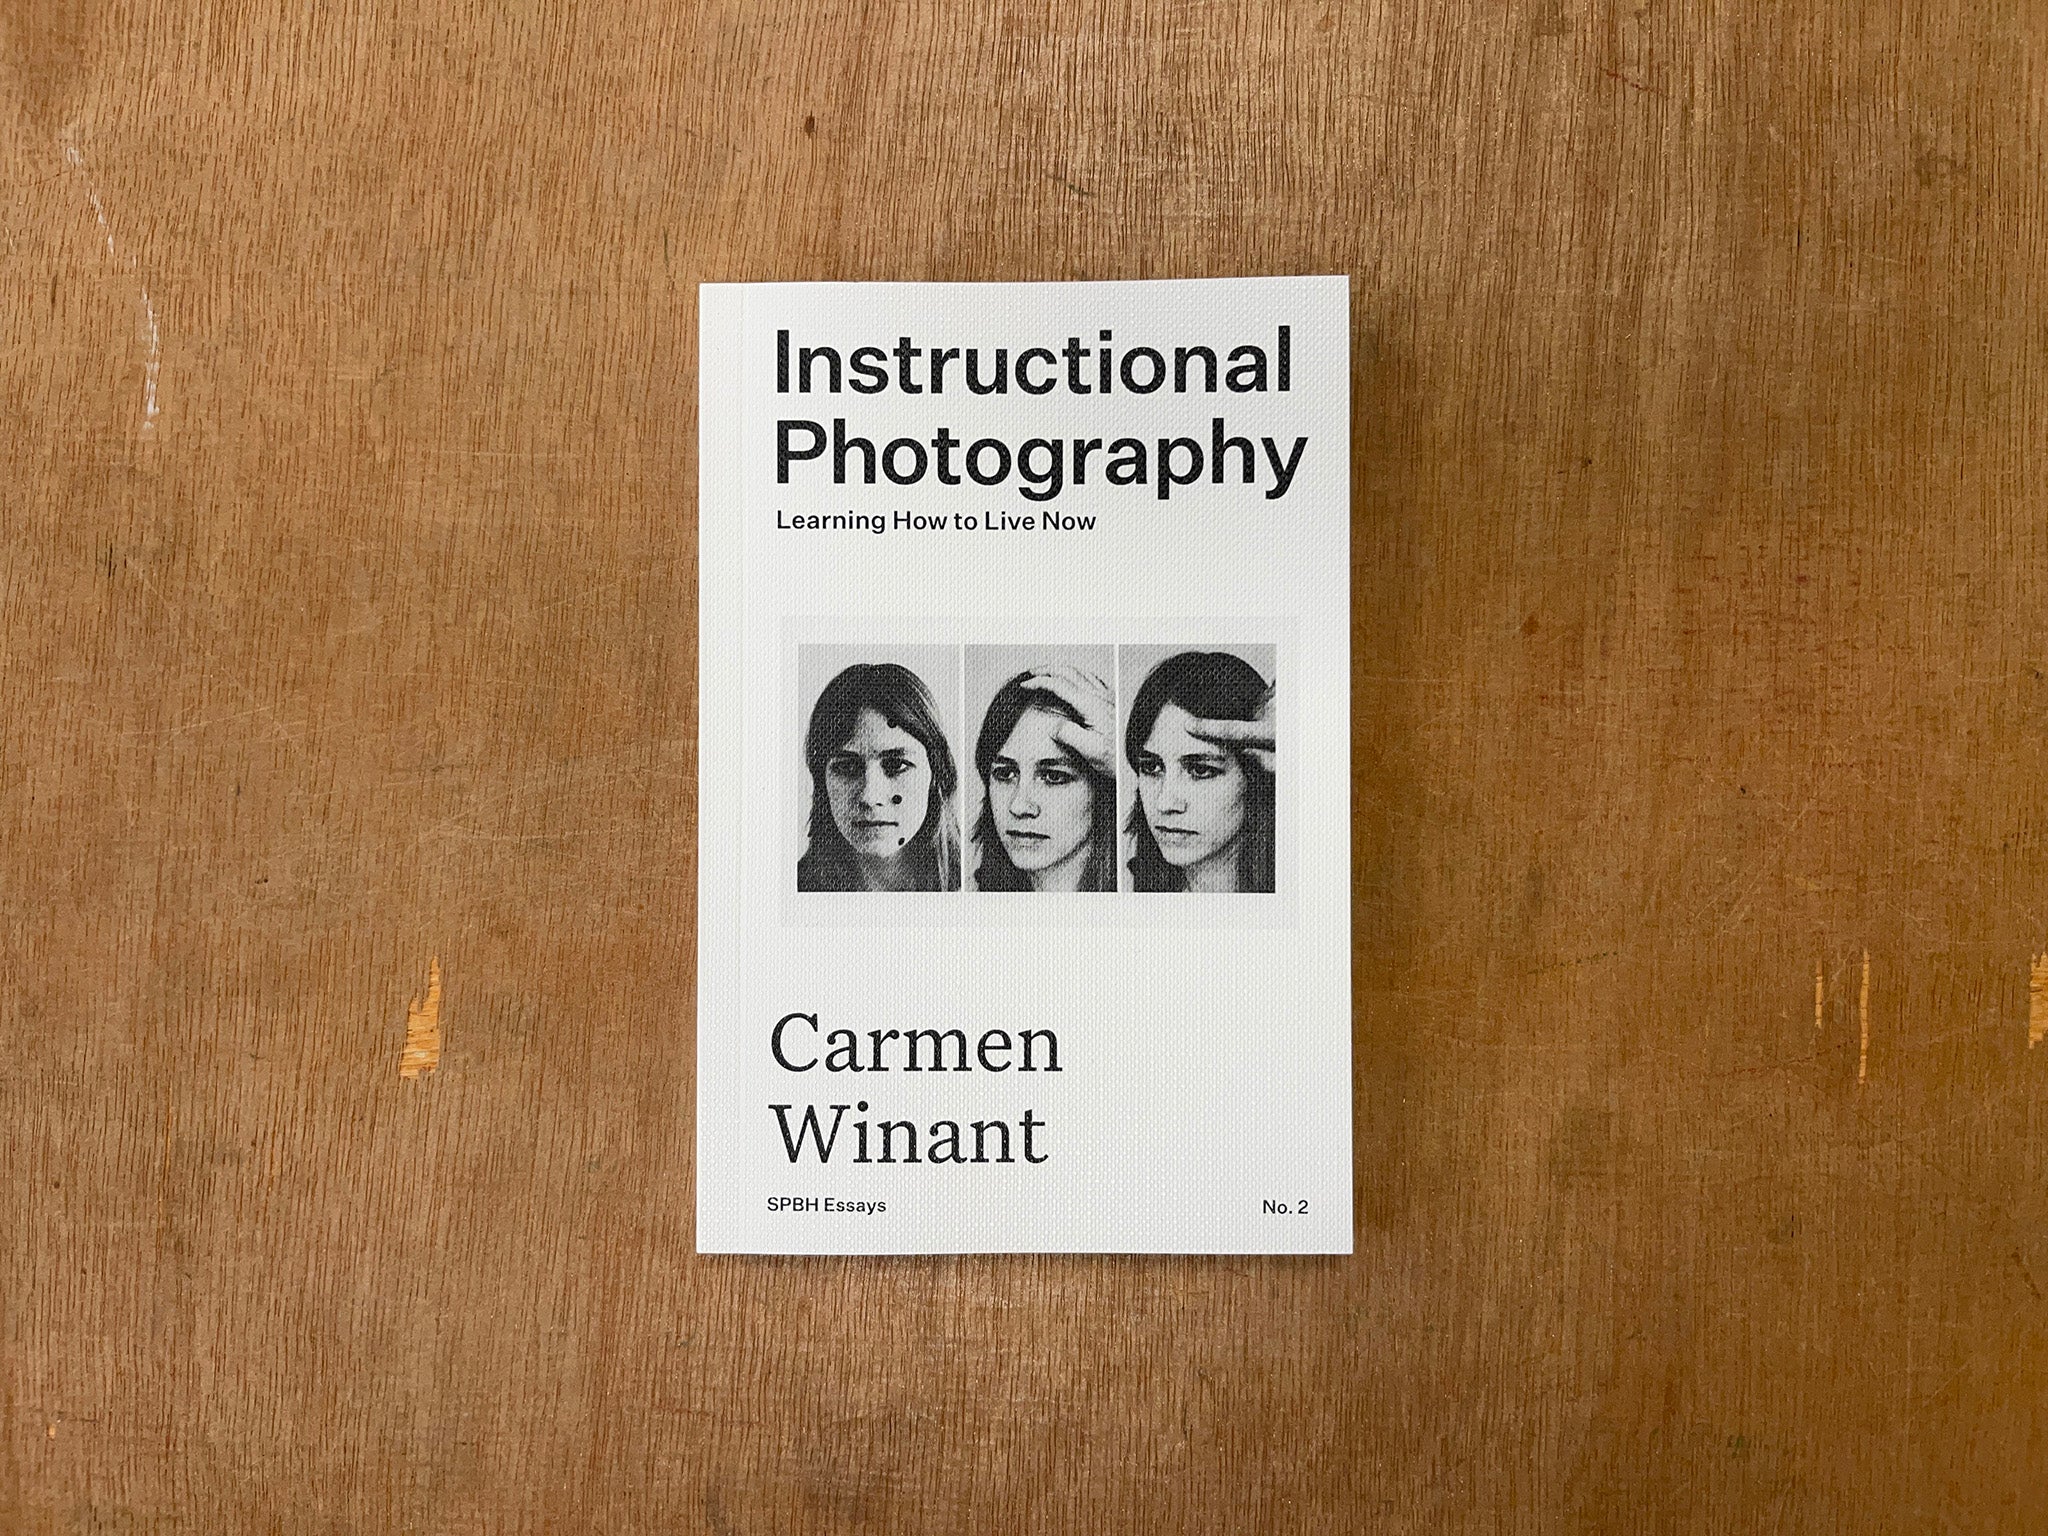 INSTRUCTIONAL PHOTOGRAPHY: LEARNING HOW TO LIVE NOW by Carmen Winant